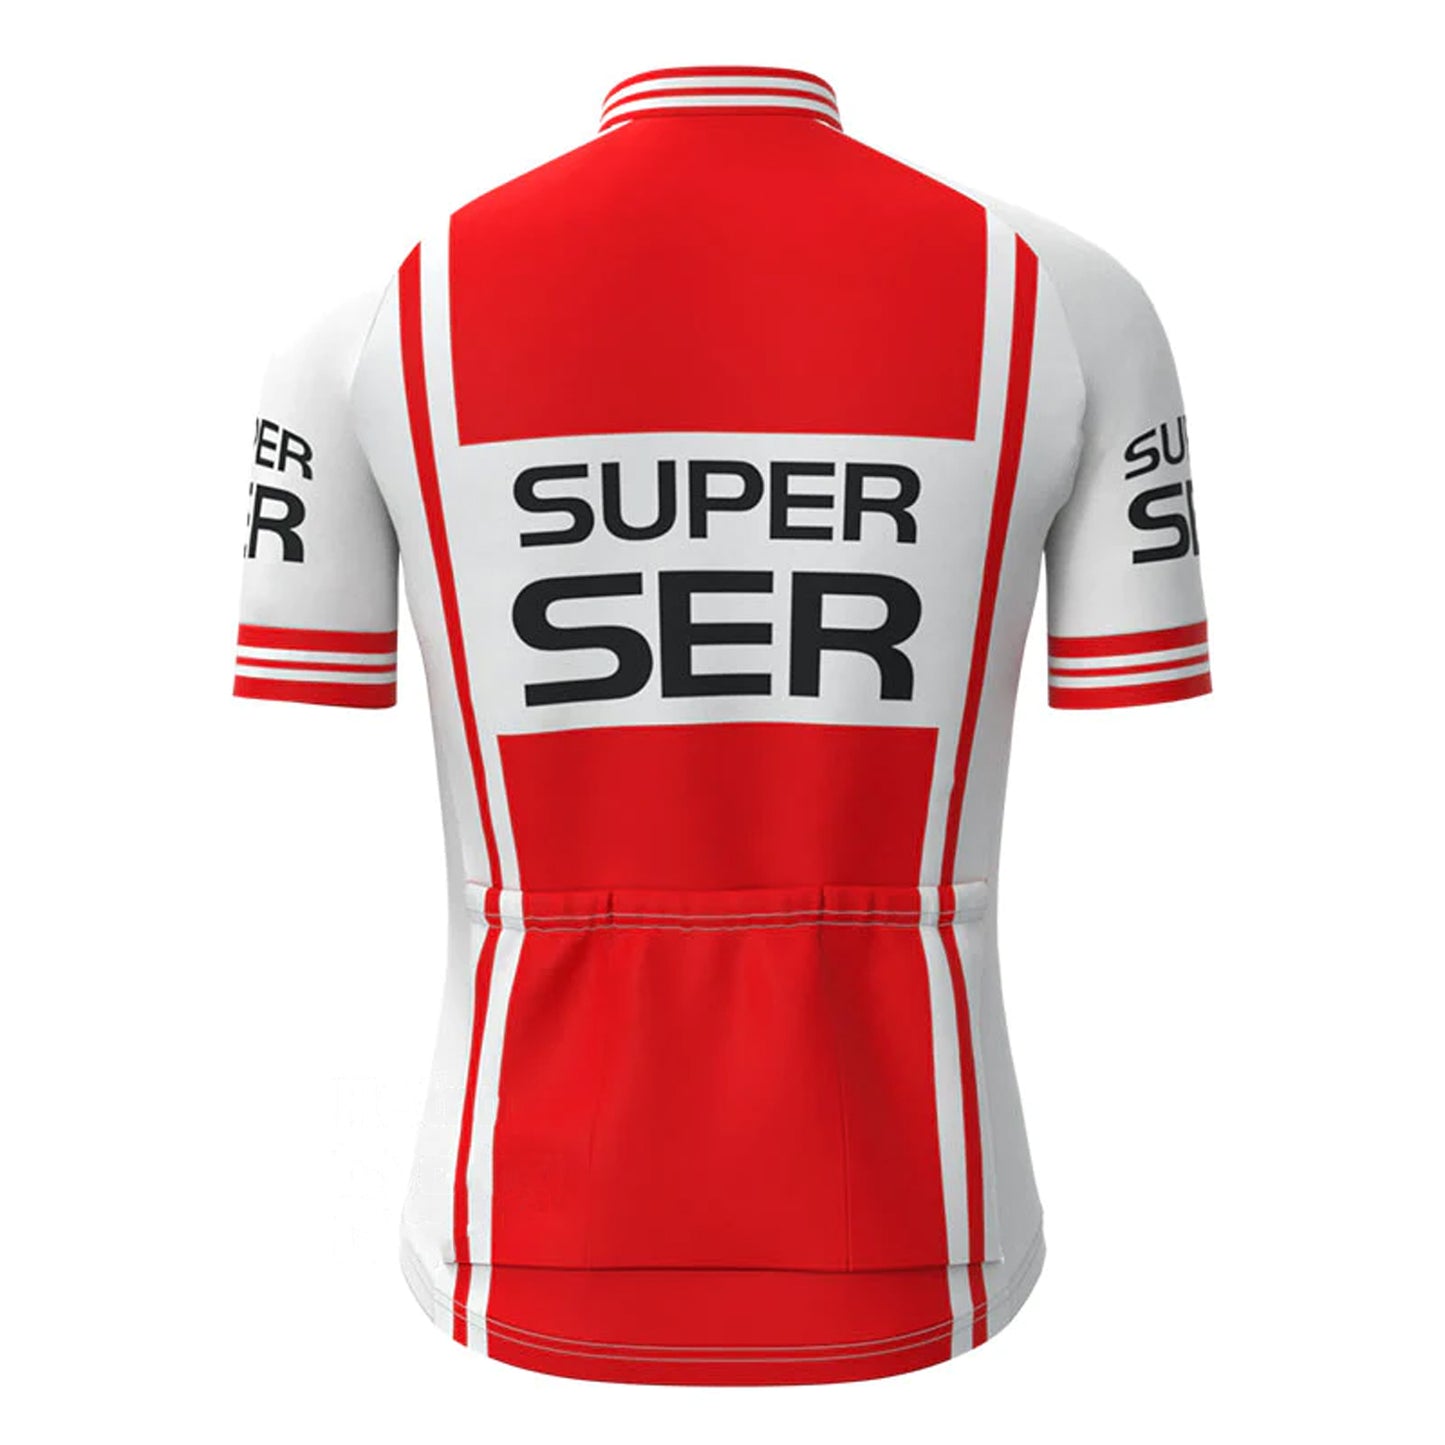 Super Ser White Red Short Sleeve Vintage Cycling Jersey Top